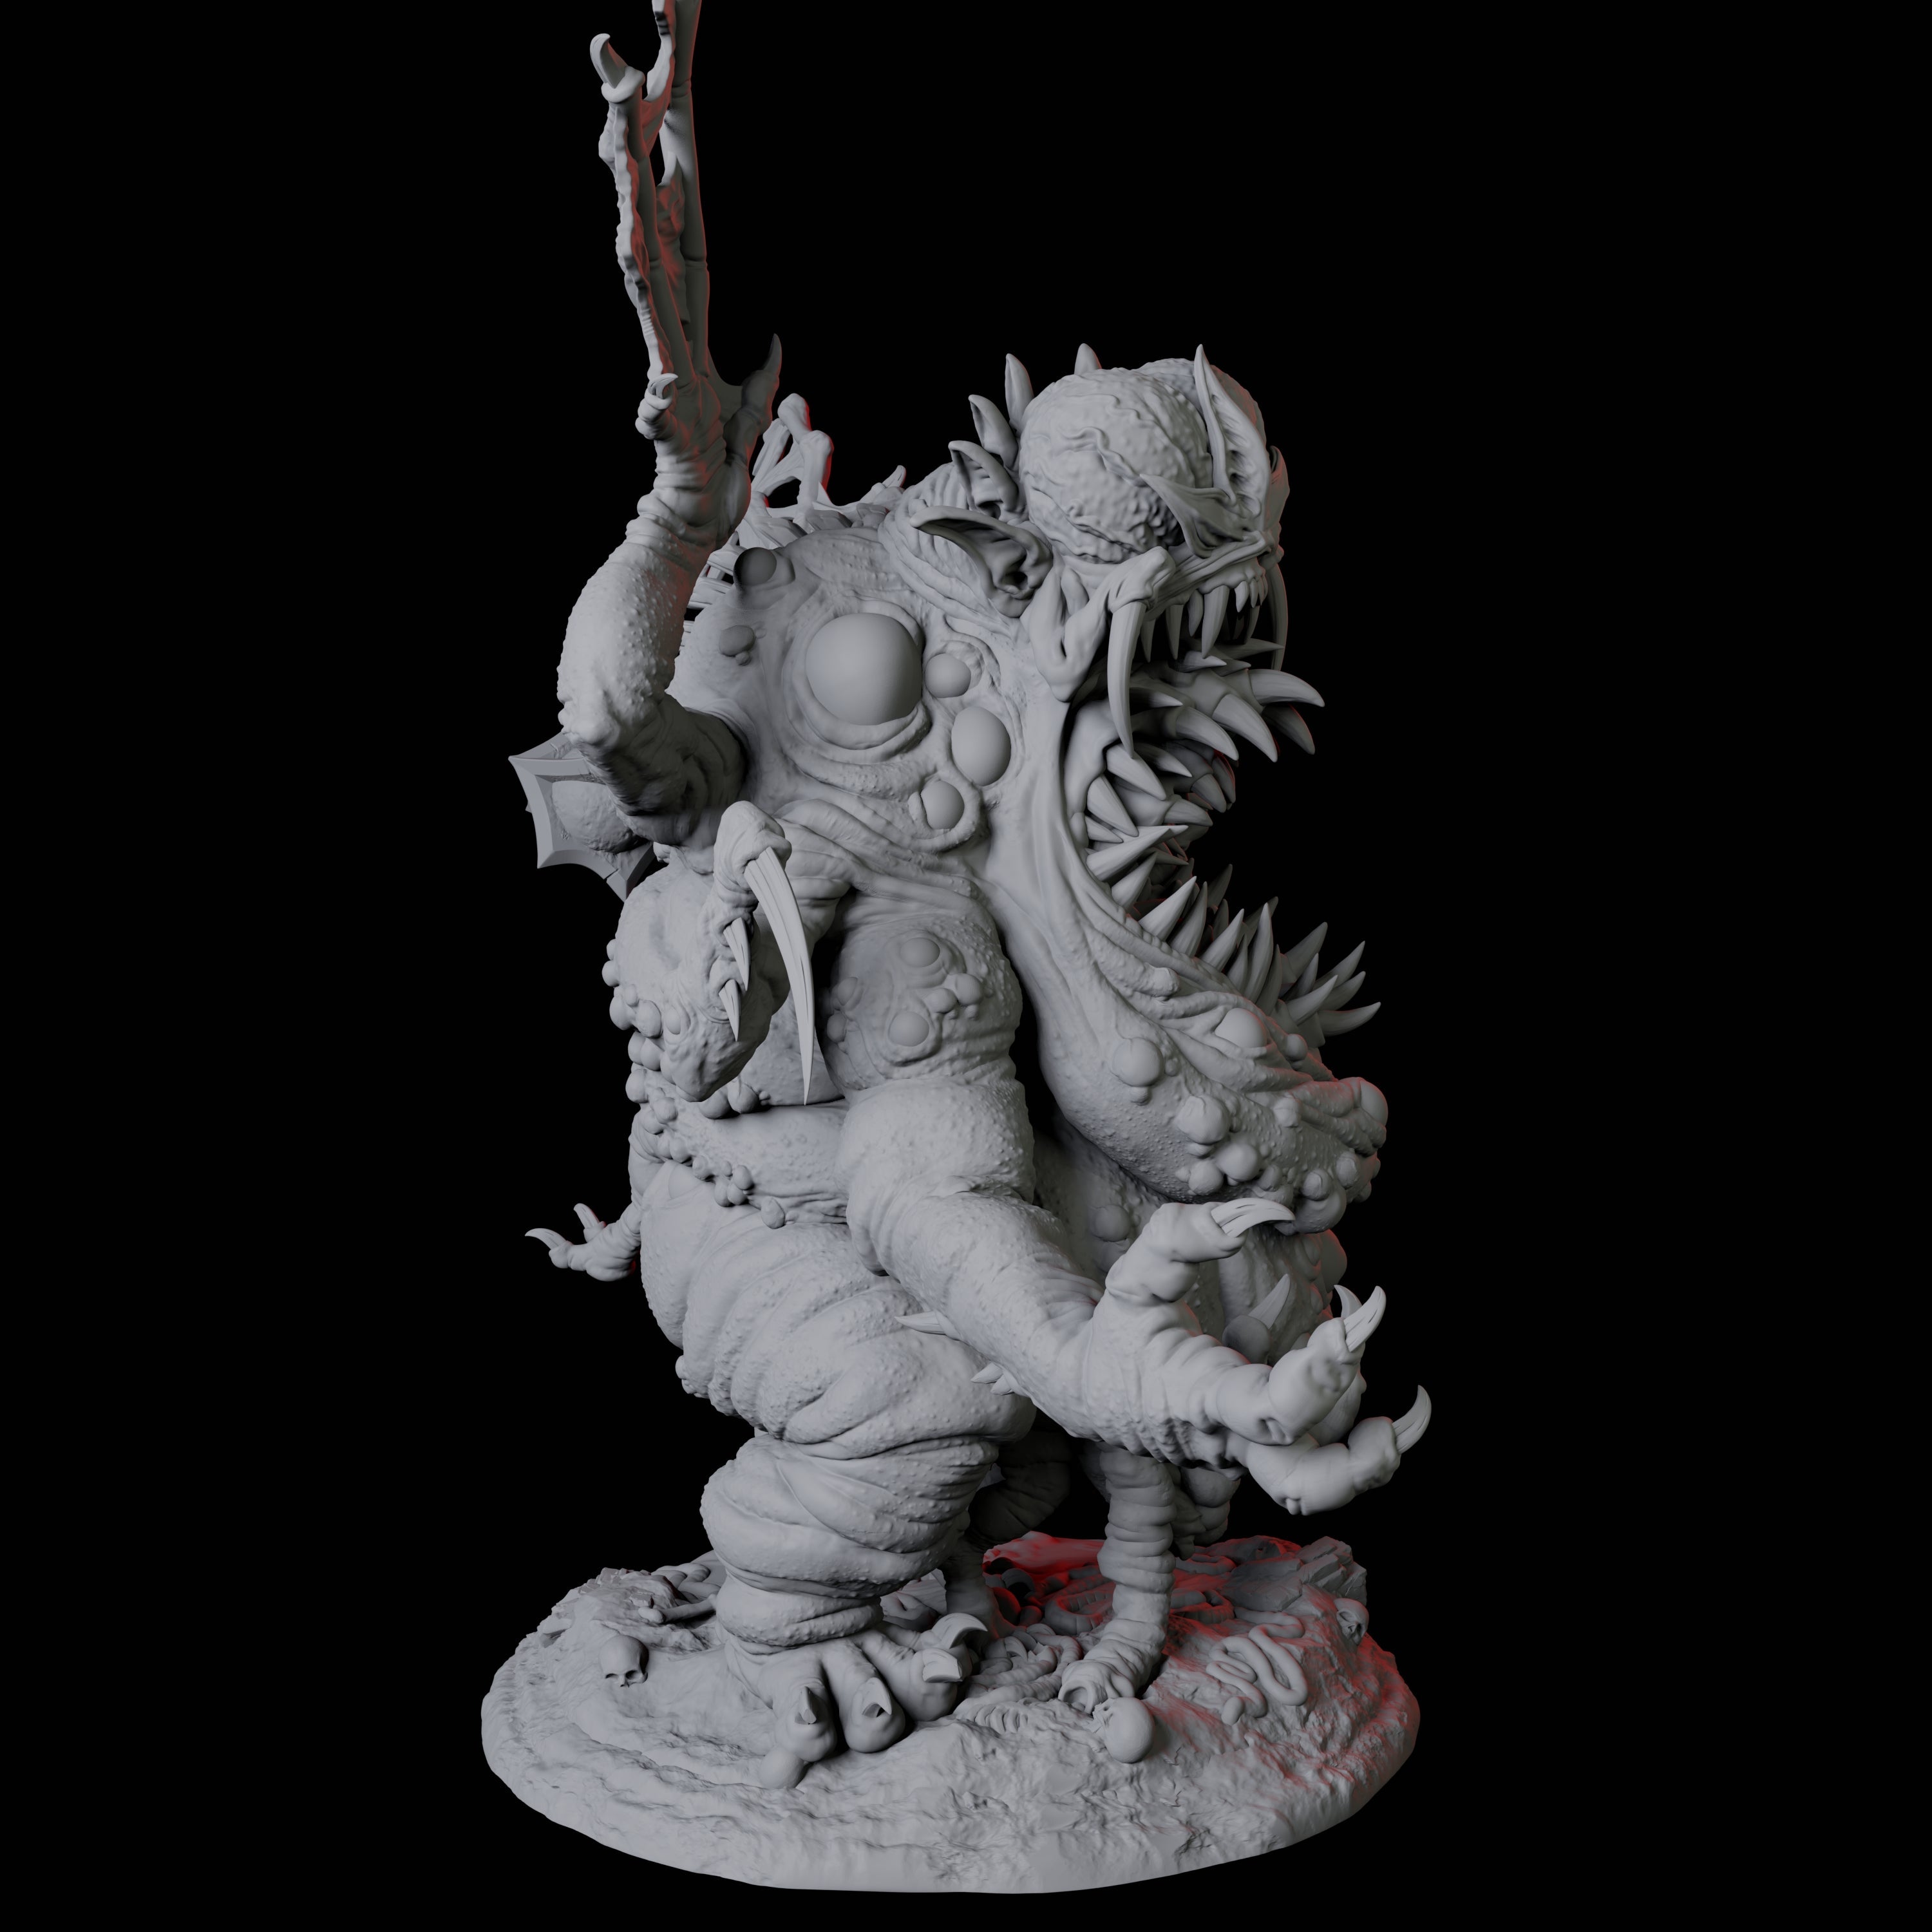 Fleshwarped Irnakurse B Miniature for Dungeons and Dragons, Pathfinder or other TTRPGs